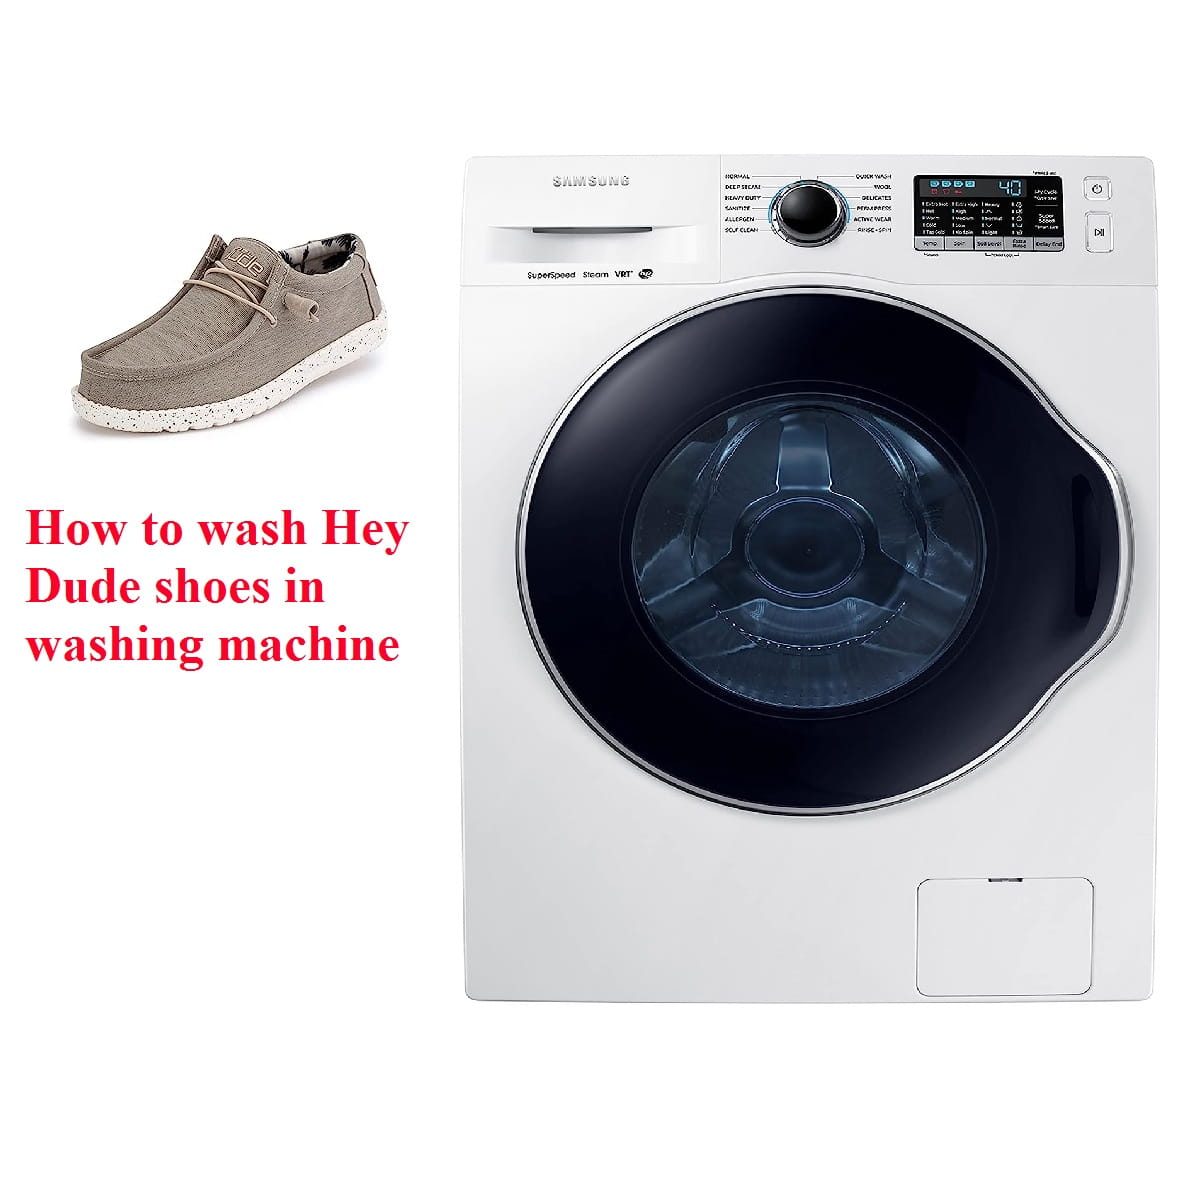 How to wash Hey Dude shoes in washing machine